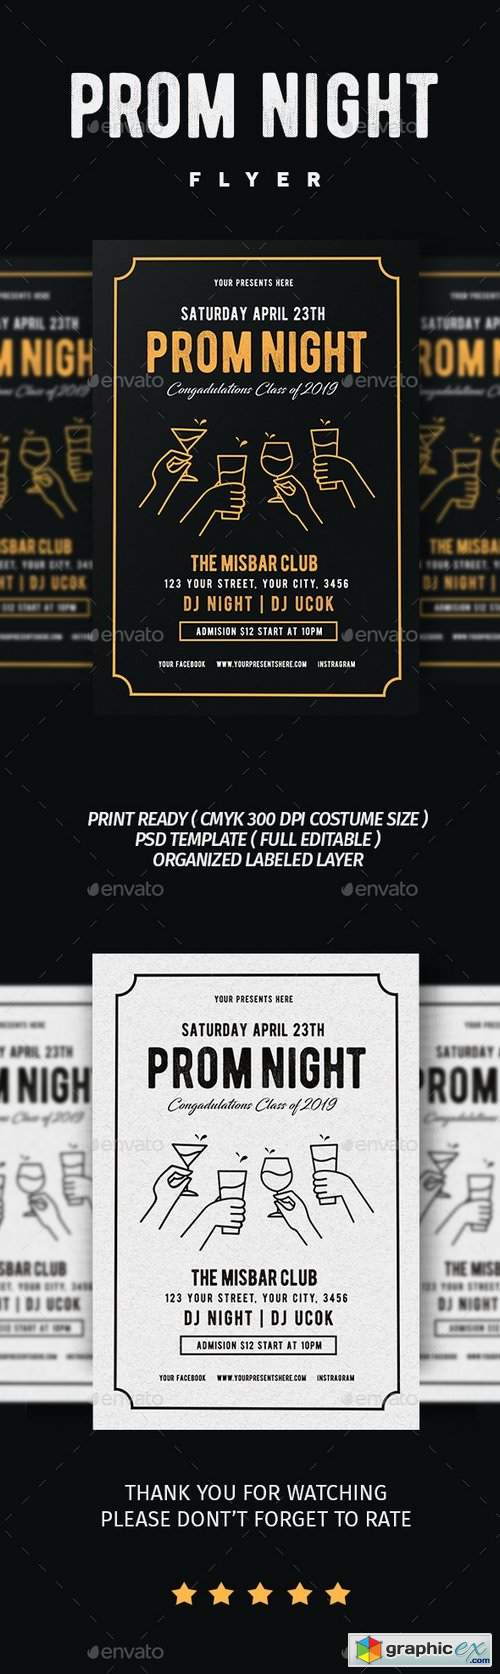 From Night Party Flyer